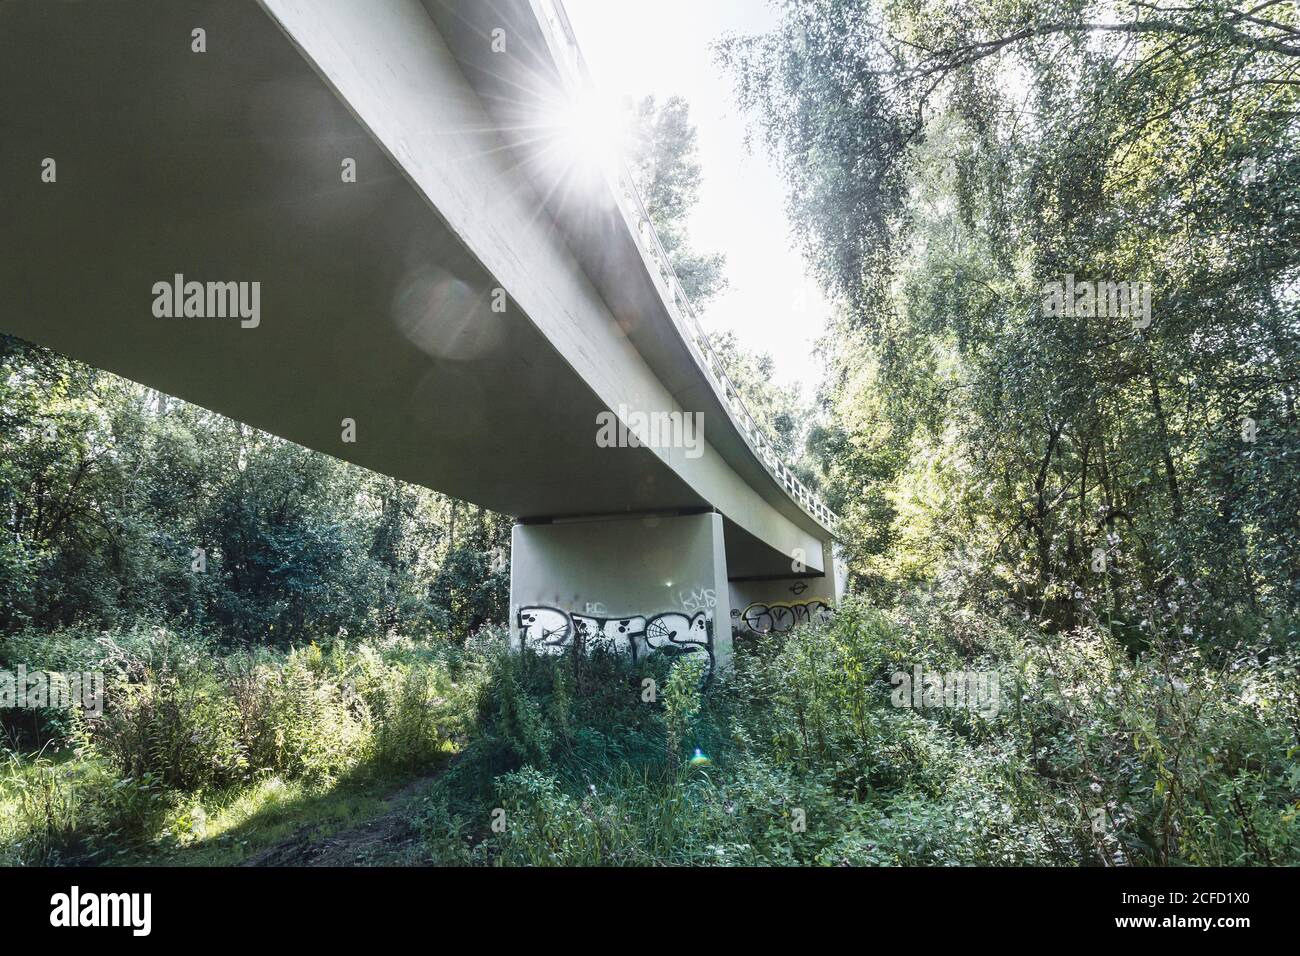 Architecture, technology and nature, under a bridge, superstructure against the light, sun spot with rays of light, vegetation on the banks of the Stock Photo